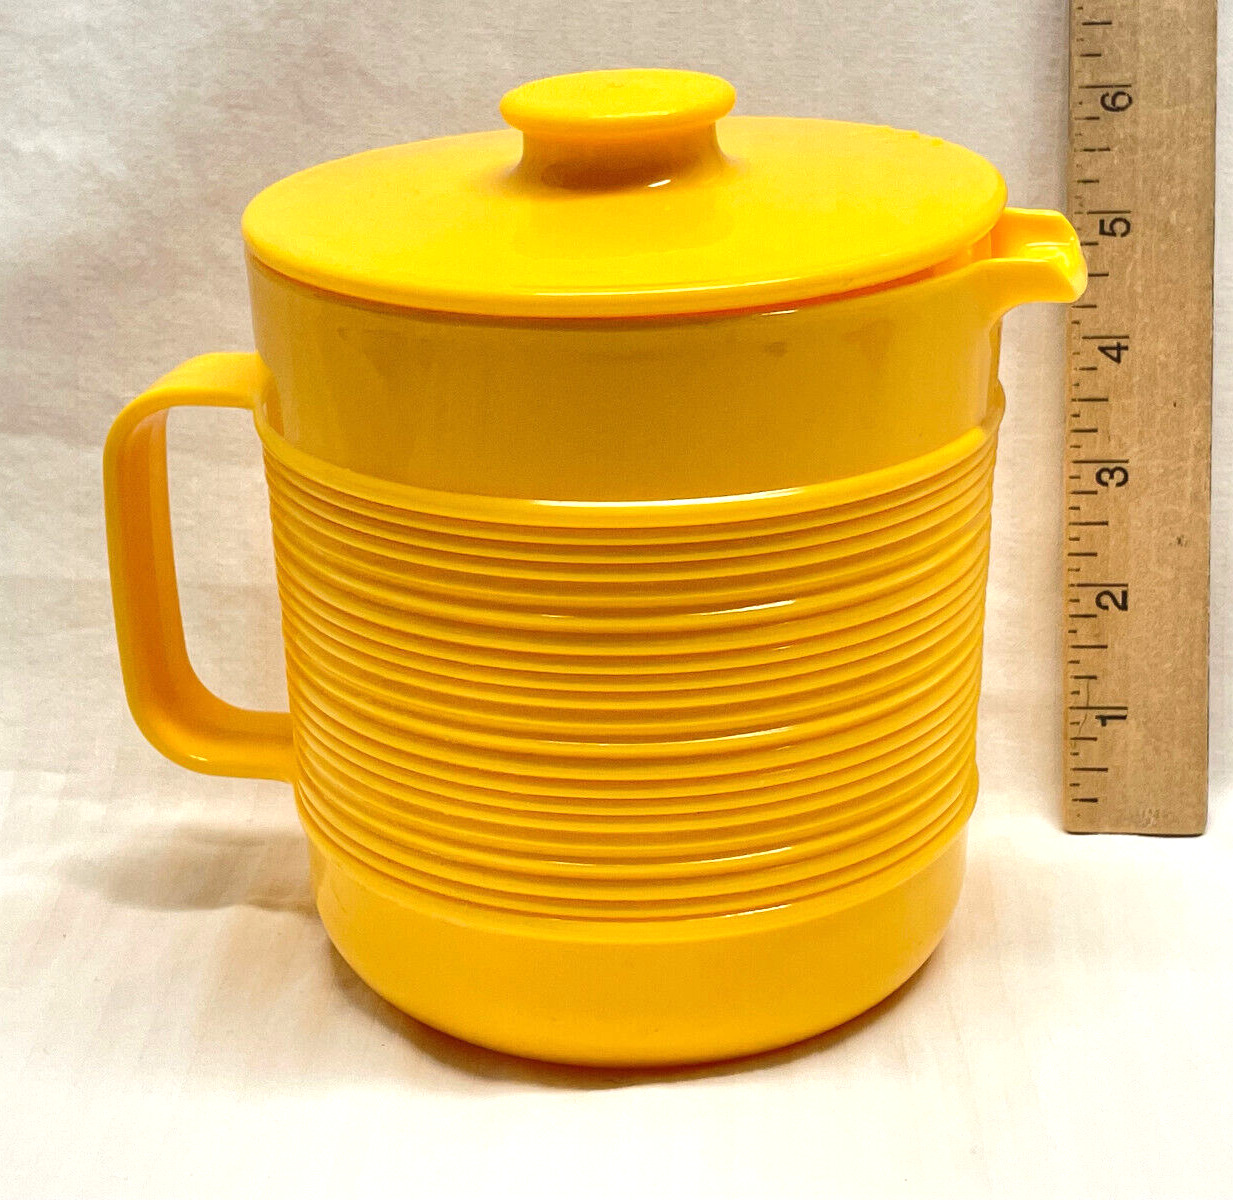 Vintage Rubbermaid Plastic Pitcher Bright Yellow Ribbed Handled 1.5 Quart #2677